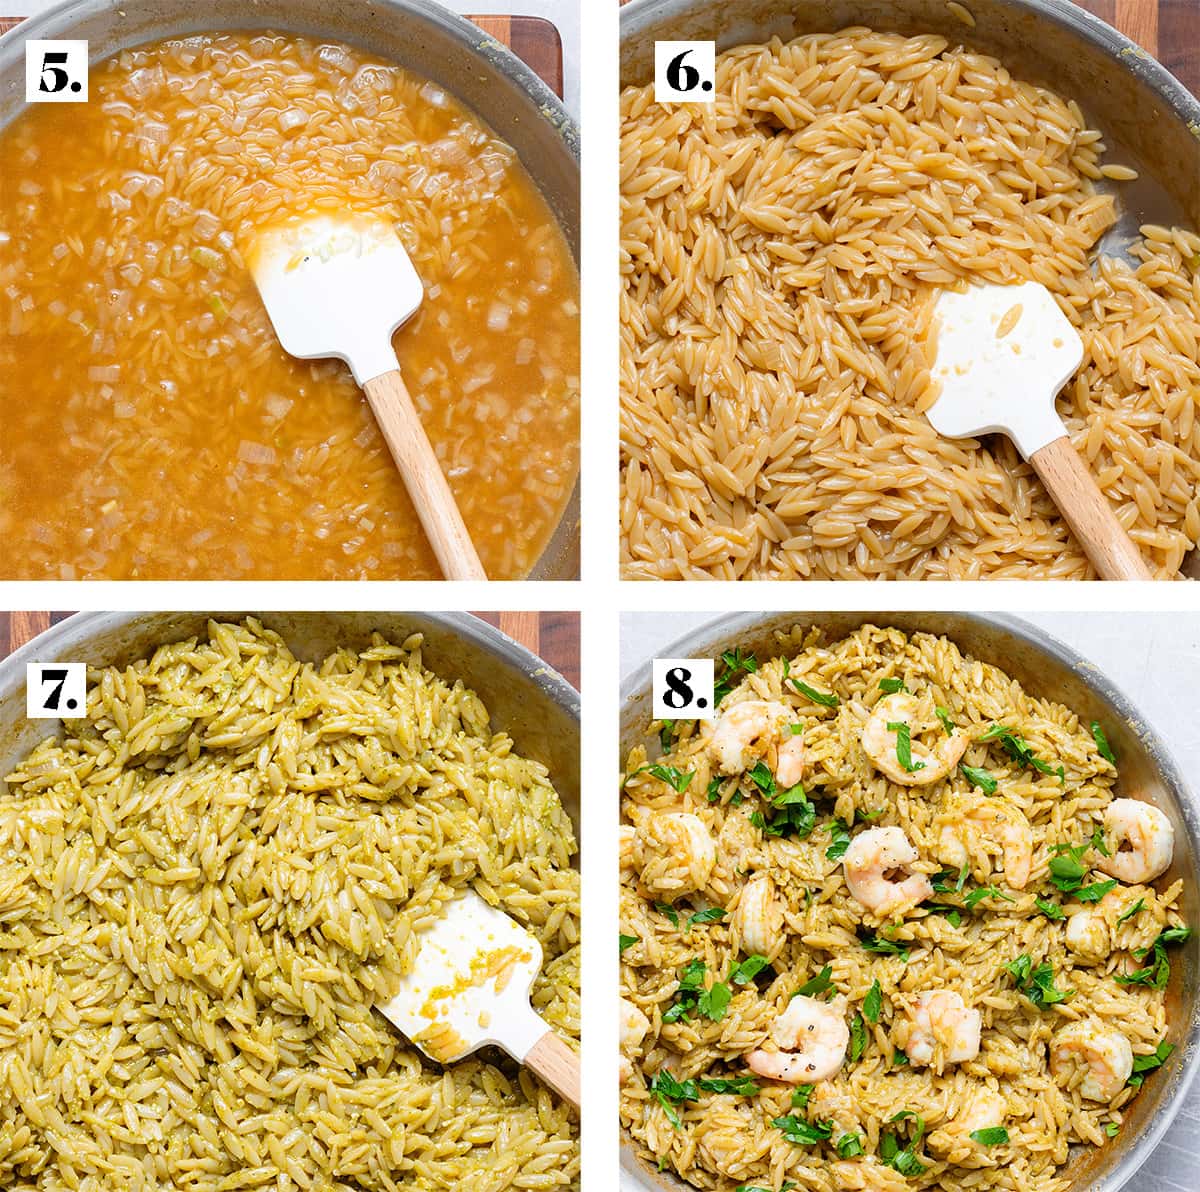 Four photos showing step by step on how to cook orzo with vegetable stock and top it with cooked shrimp and parsley.